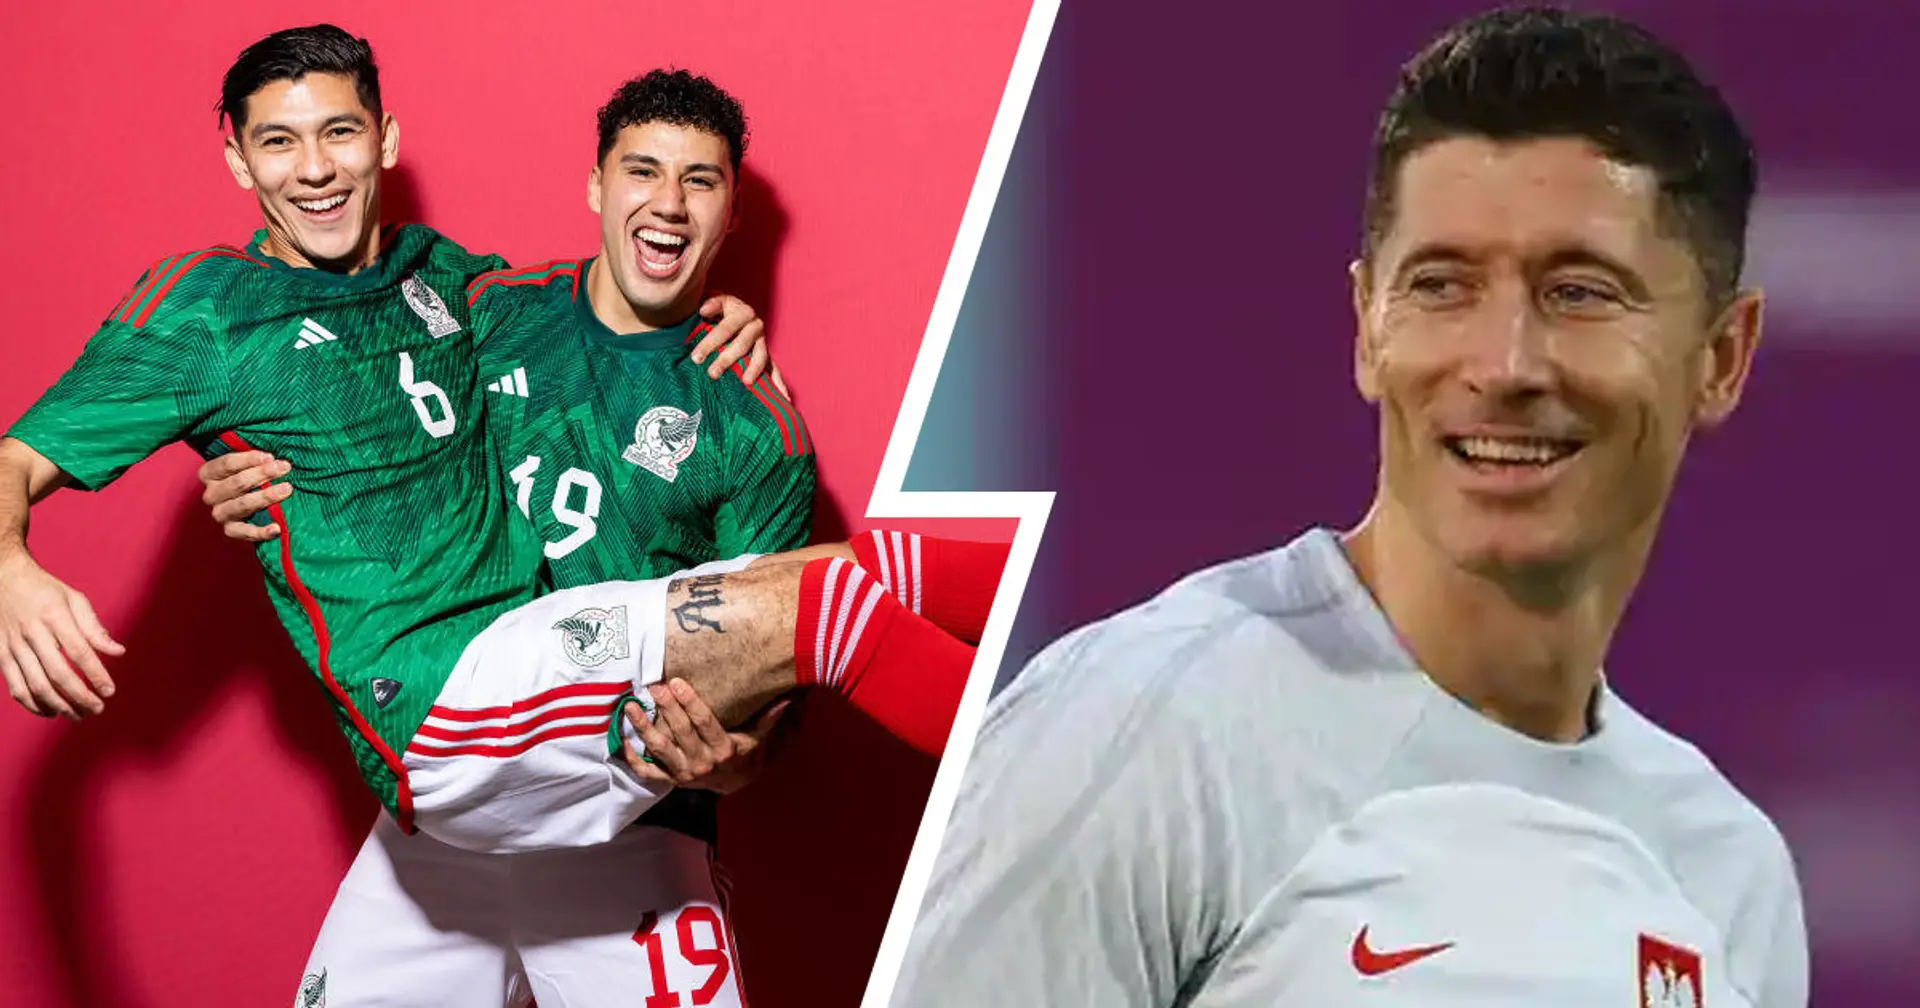 Mexico vs Poland: Official team lineups for the World Cup clash announced